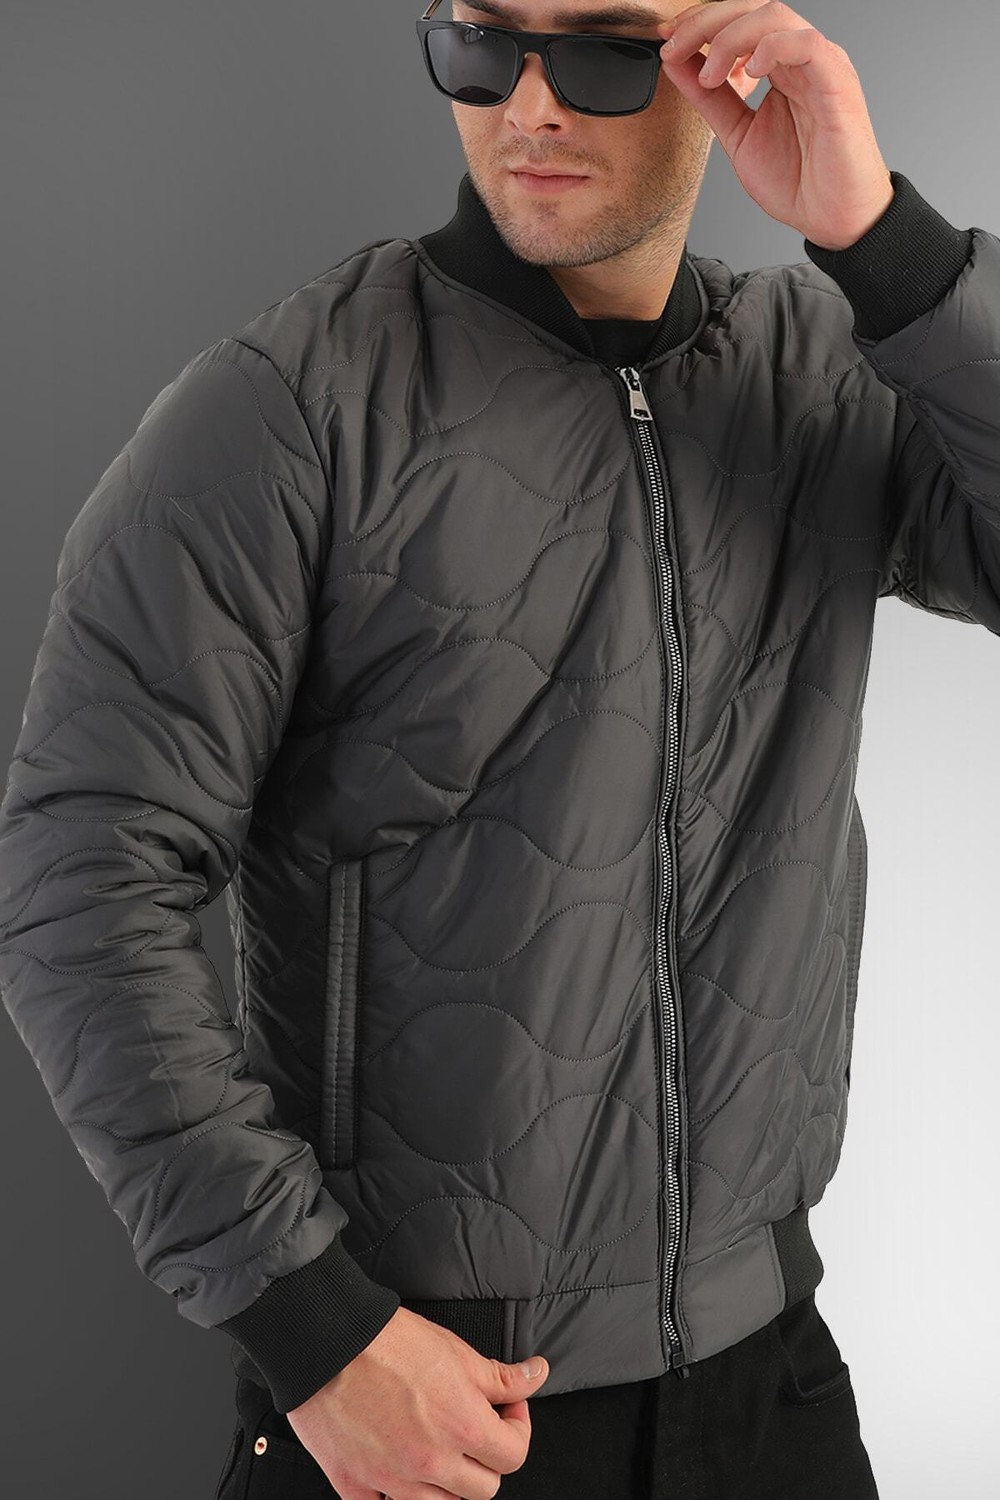 D1fference Men's Anthracite Water And Windproof Quilted Patterned Winter Coat.